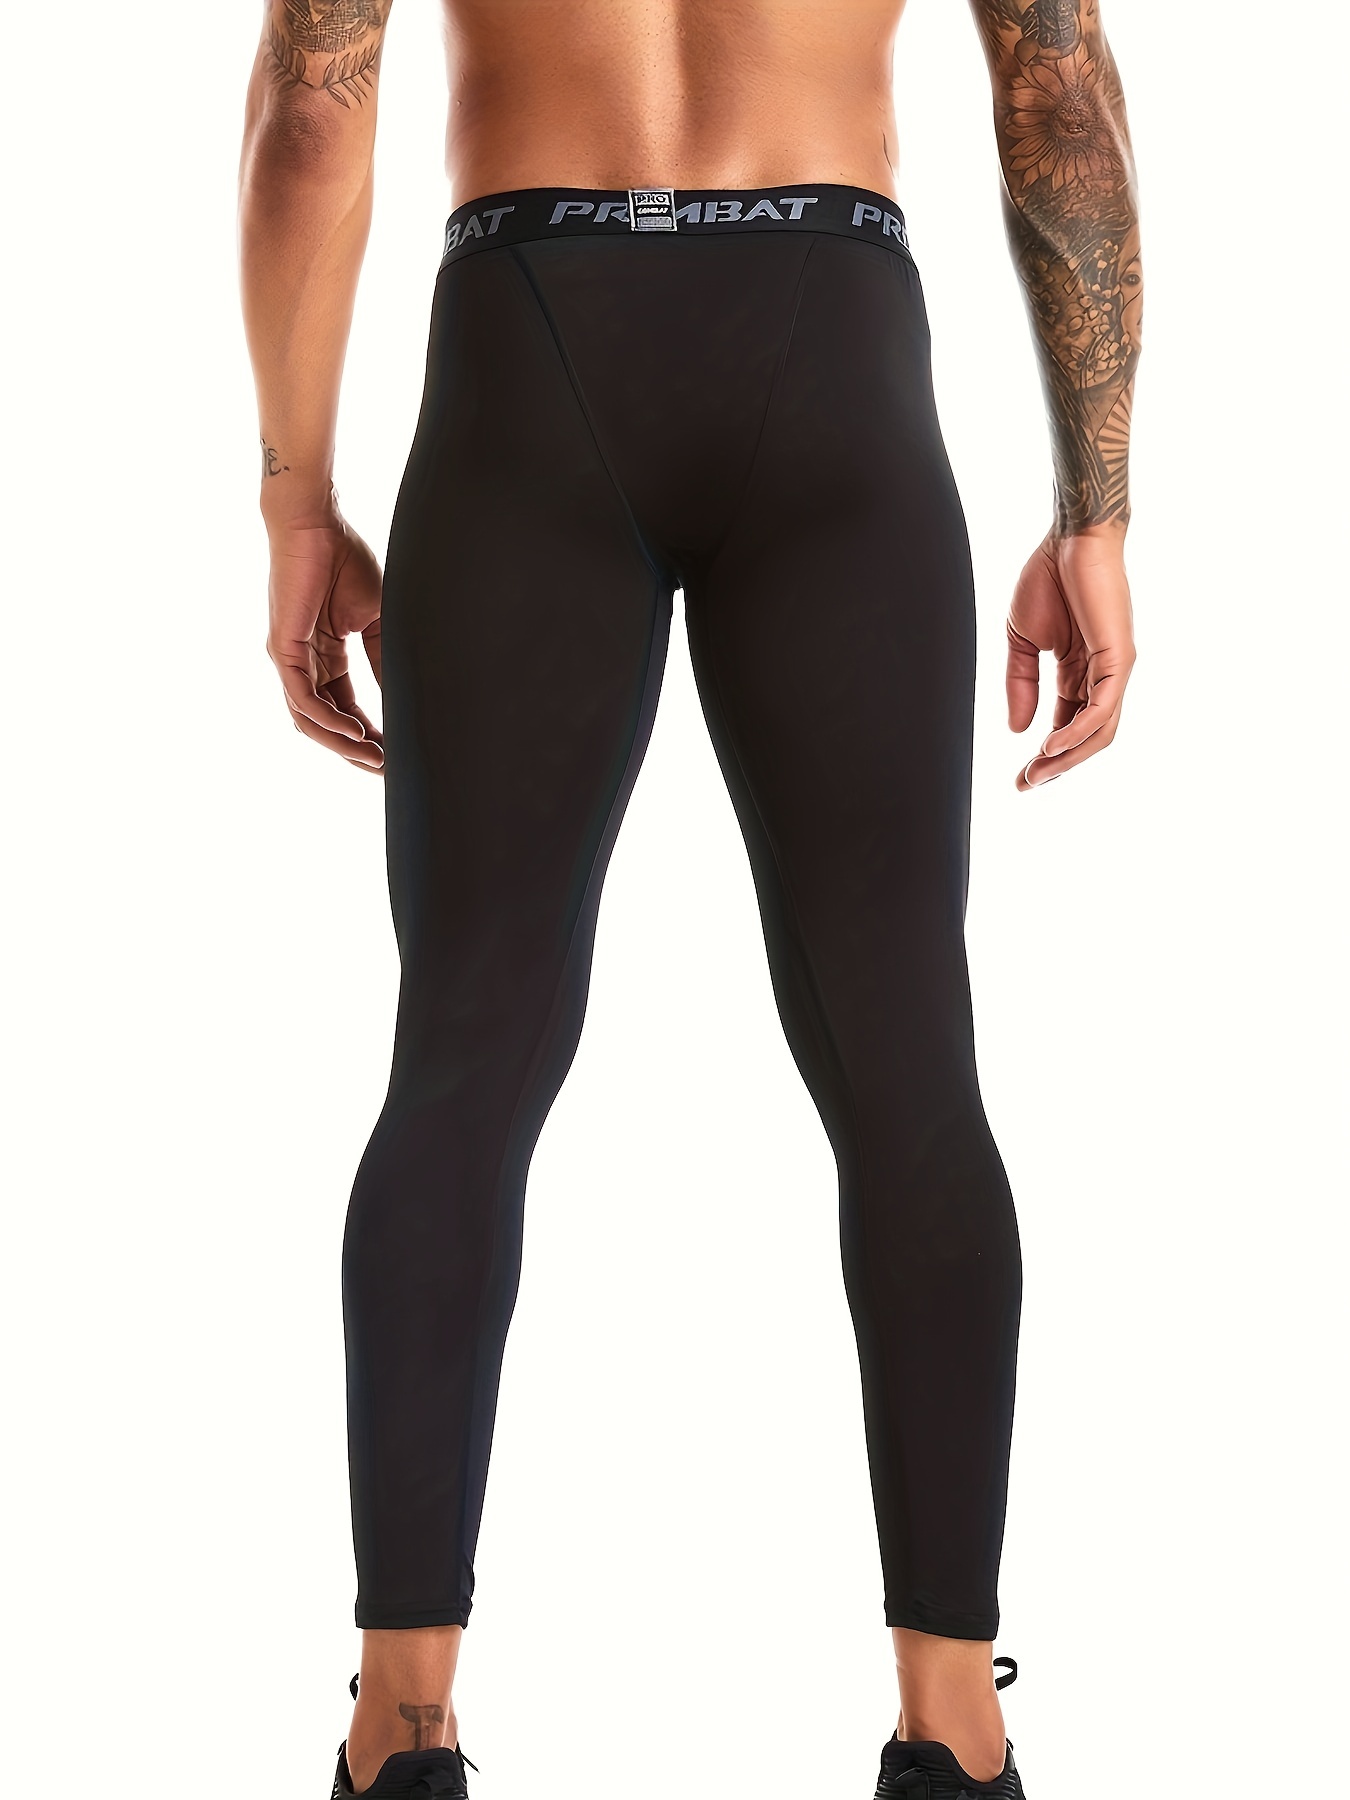 Sale!!! New Men Compression Base Layer Running Gym Cycling Football  leggings 